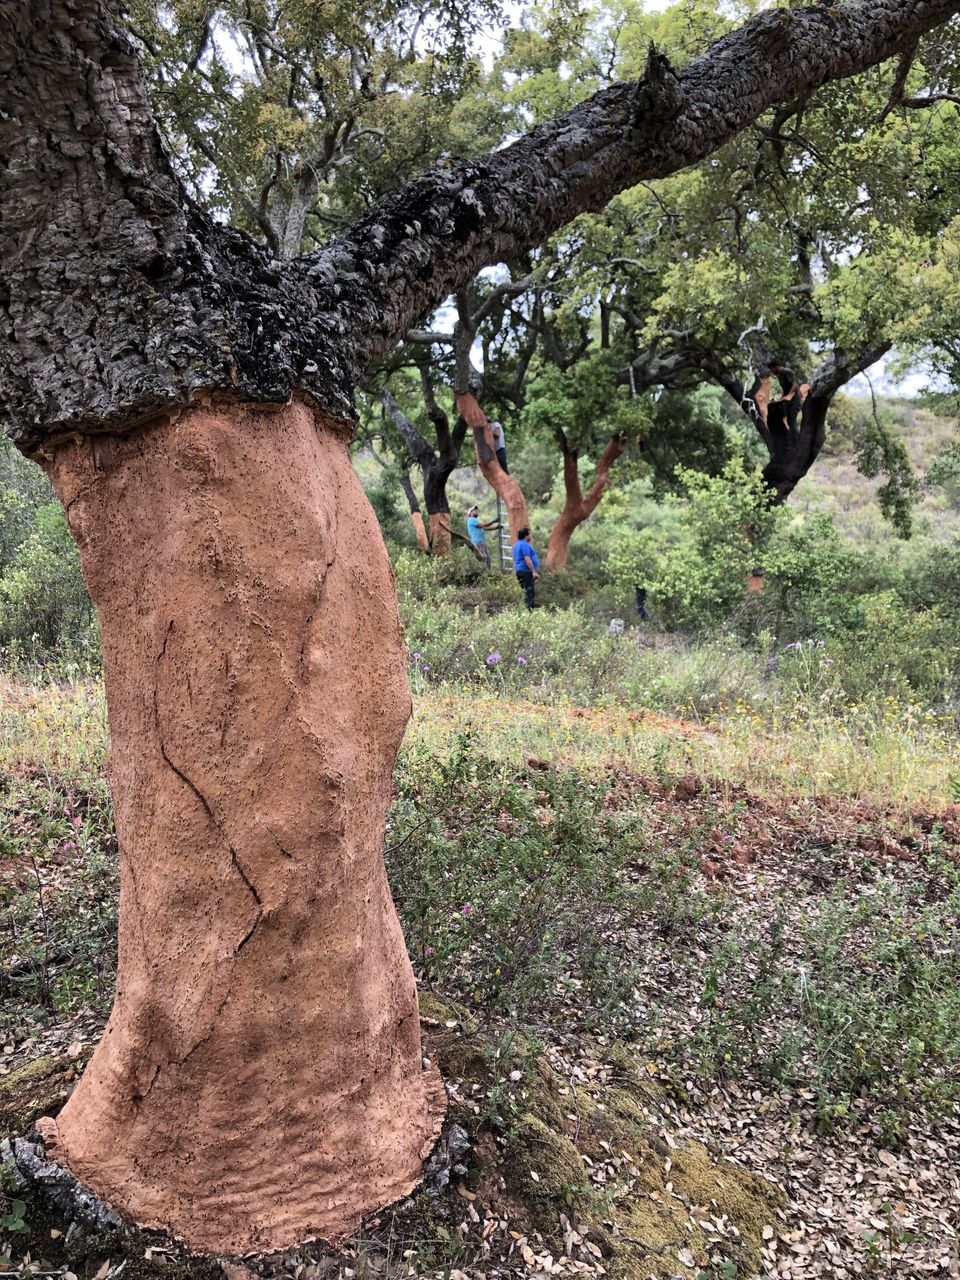 A cork tree, stripped, just after harvest